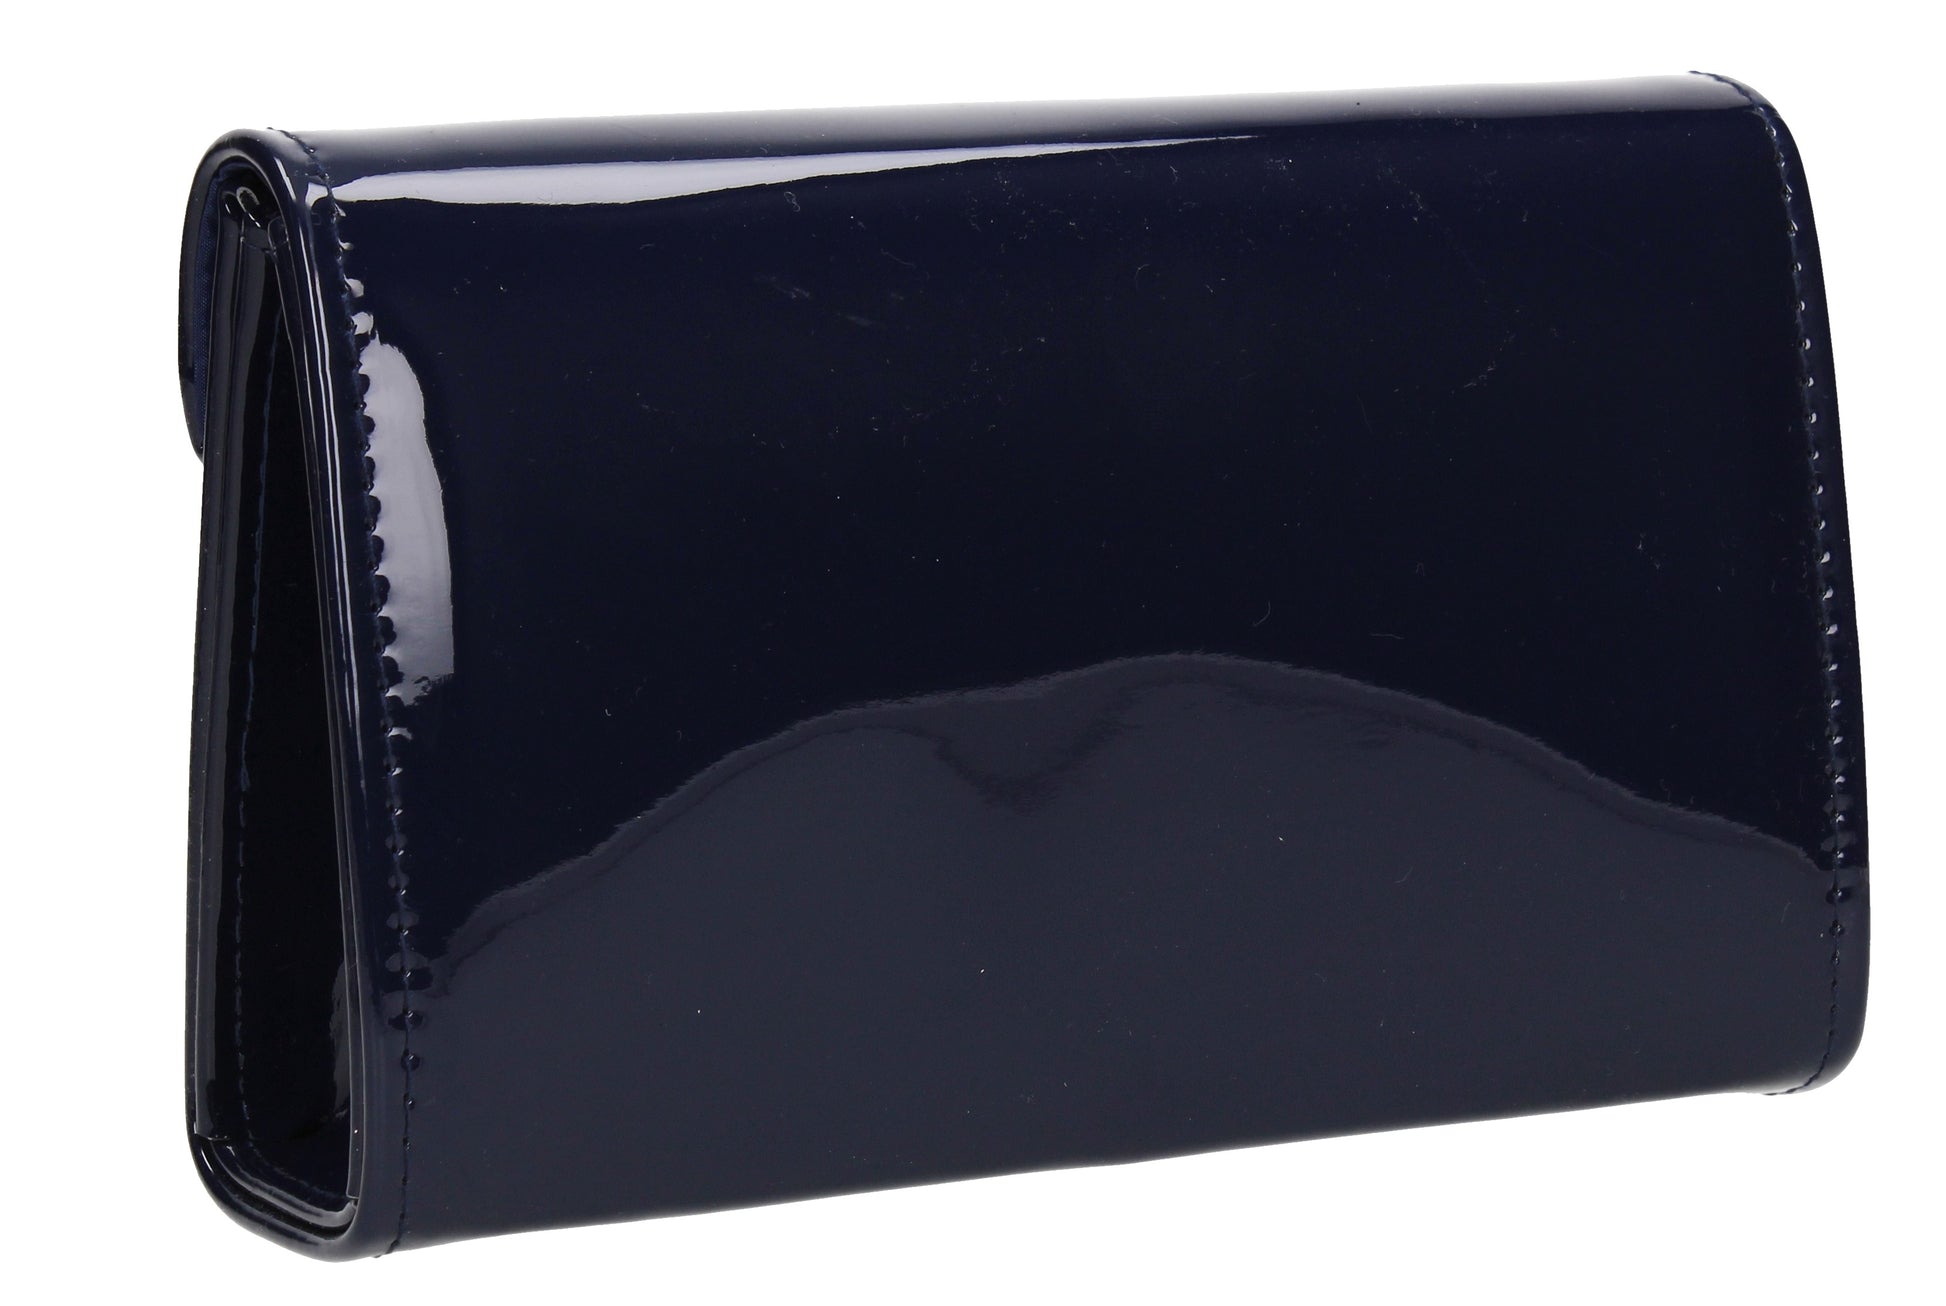 SWANKYSWANS Wendy V Patent Clutch Bag Navy Blue Cute Cheap Clutch Bag For Weddings School and Work